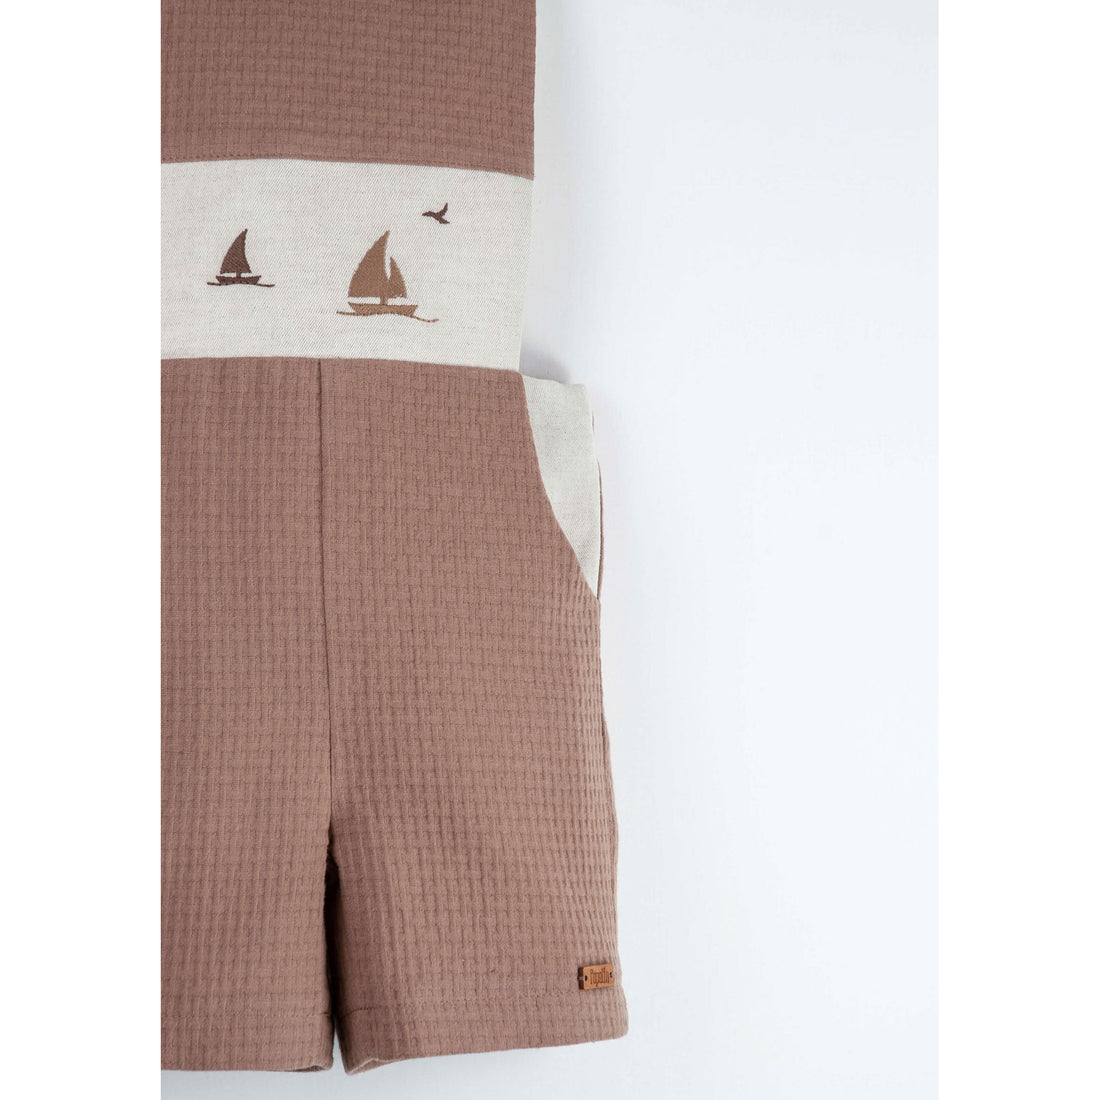 Popelin Brown Boat Dungarees